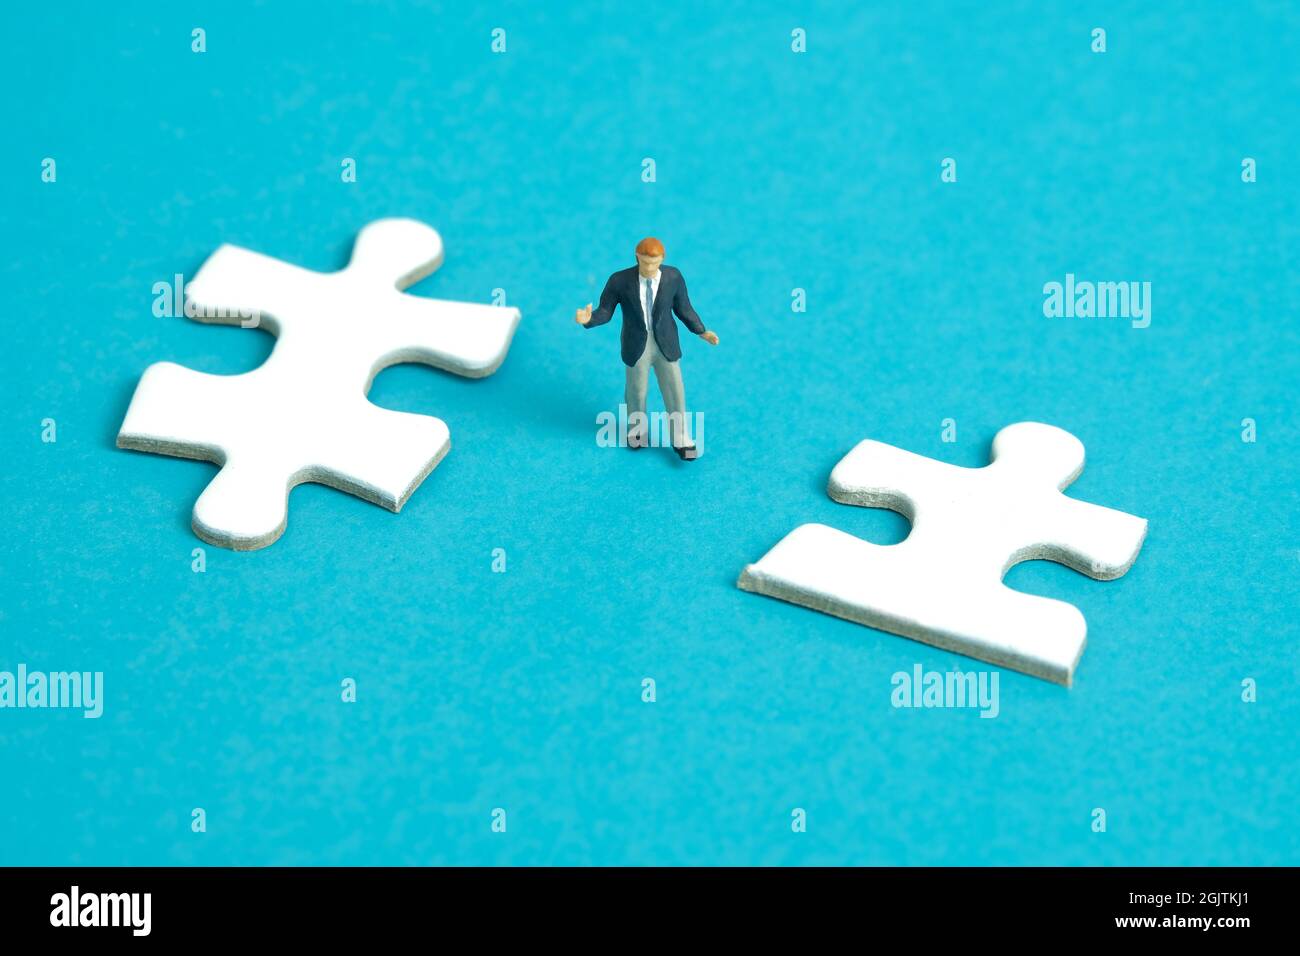 Miniature people toy figure photography. A shrugging businessman standing the middle of two puzzle jigsaw piece. Isolated on blue background. Image ph Stock Photo